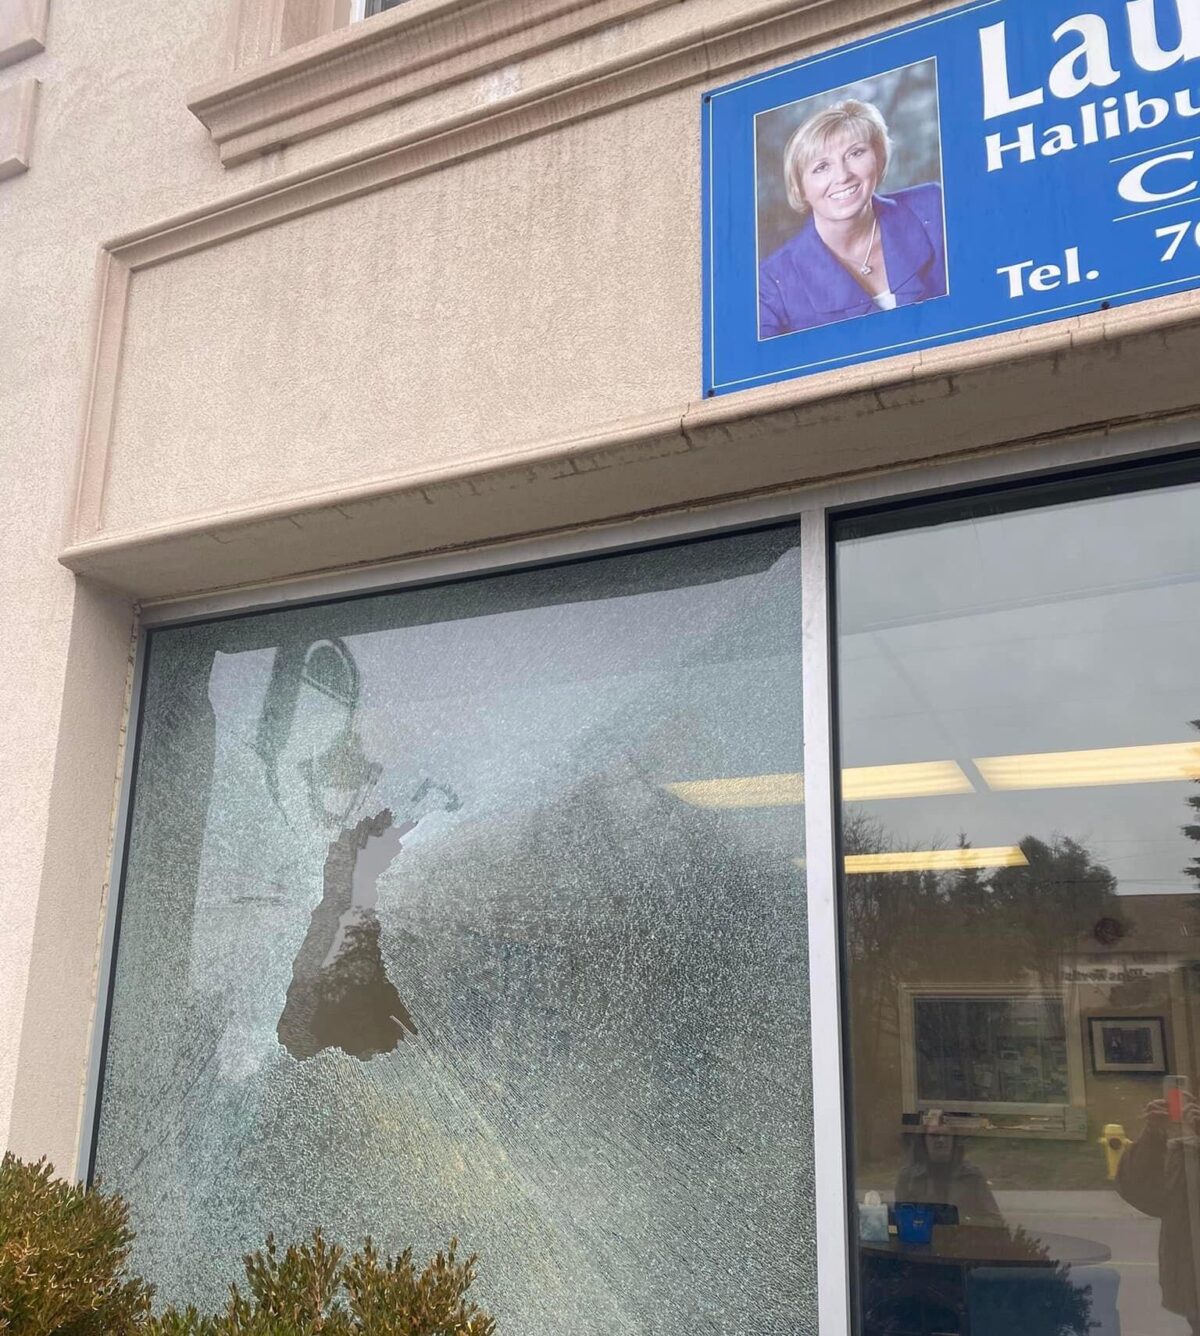 A window of the constituency office of Haliburton—Kawartha Lakes—Brock MPP Laurie Scott was found damaged on April 14.